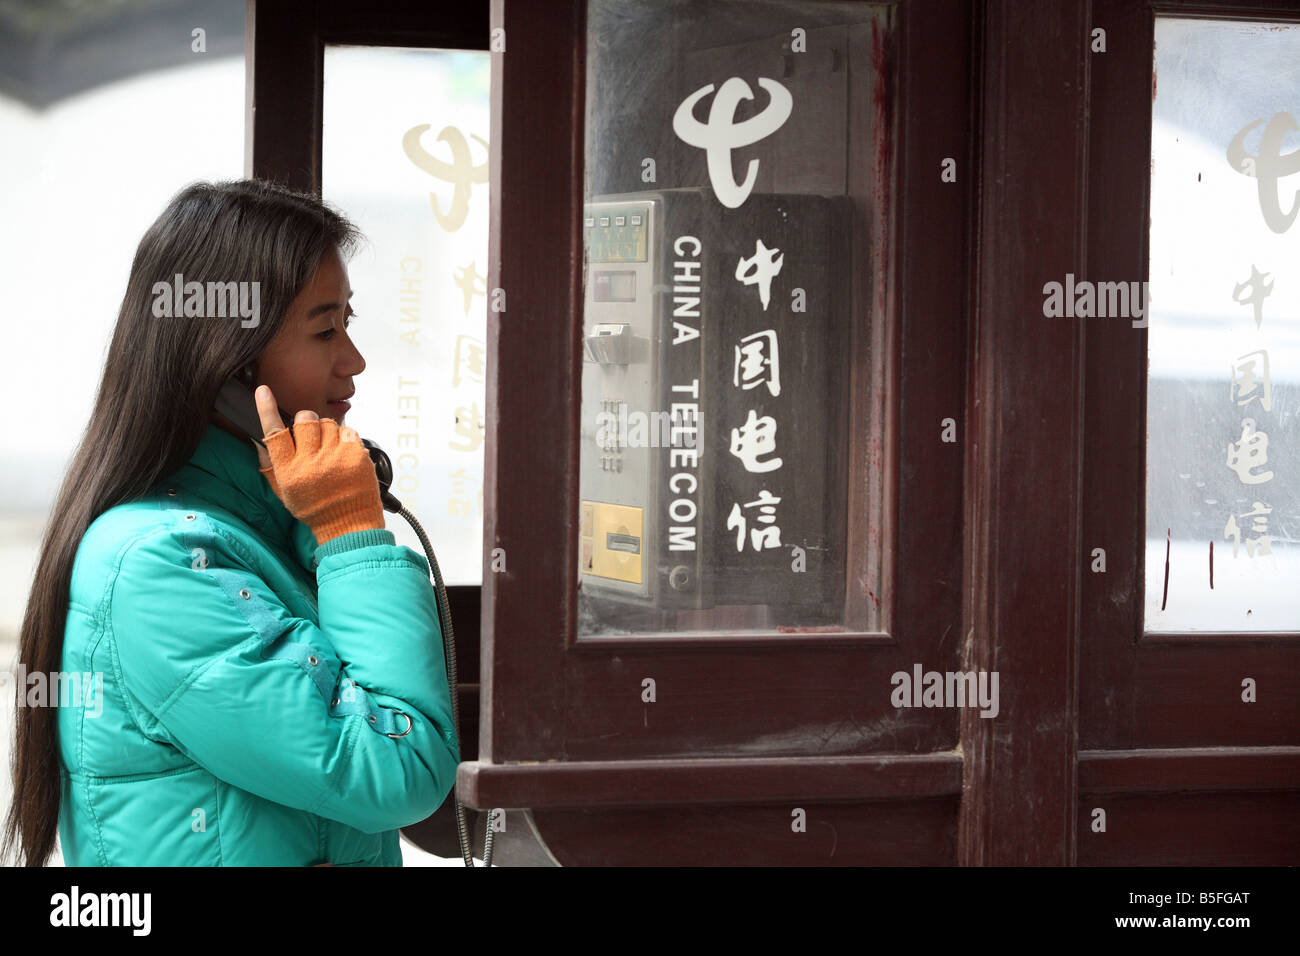 A young Asian woman at a public phone booth, Suzhou, China Stock Photo